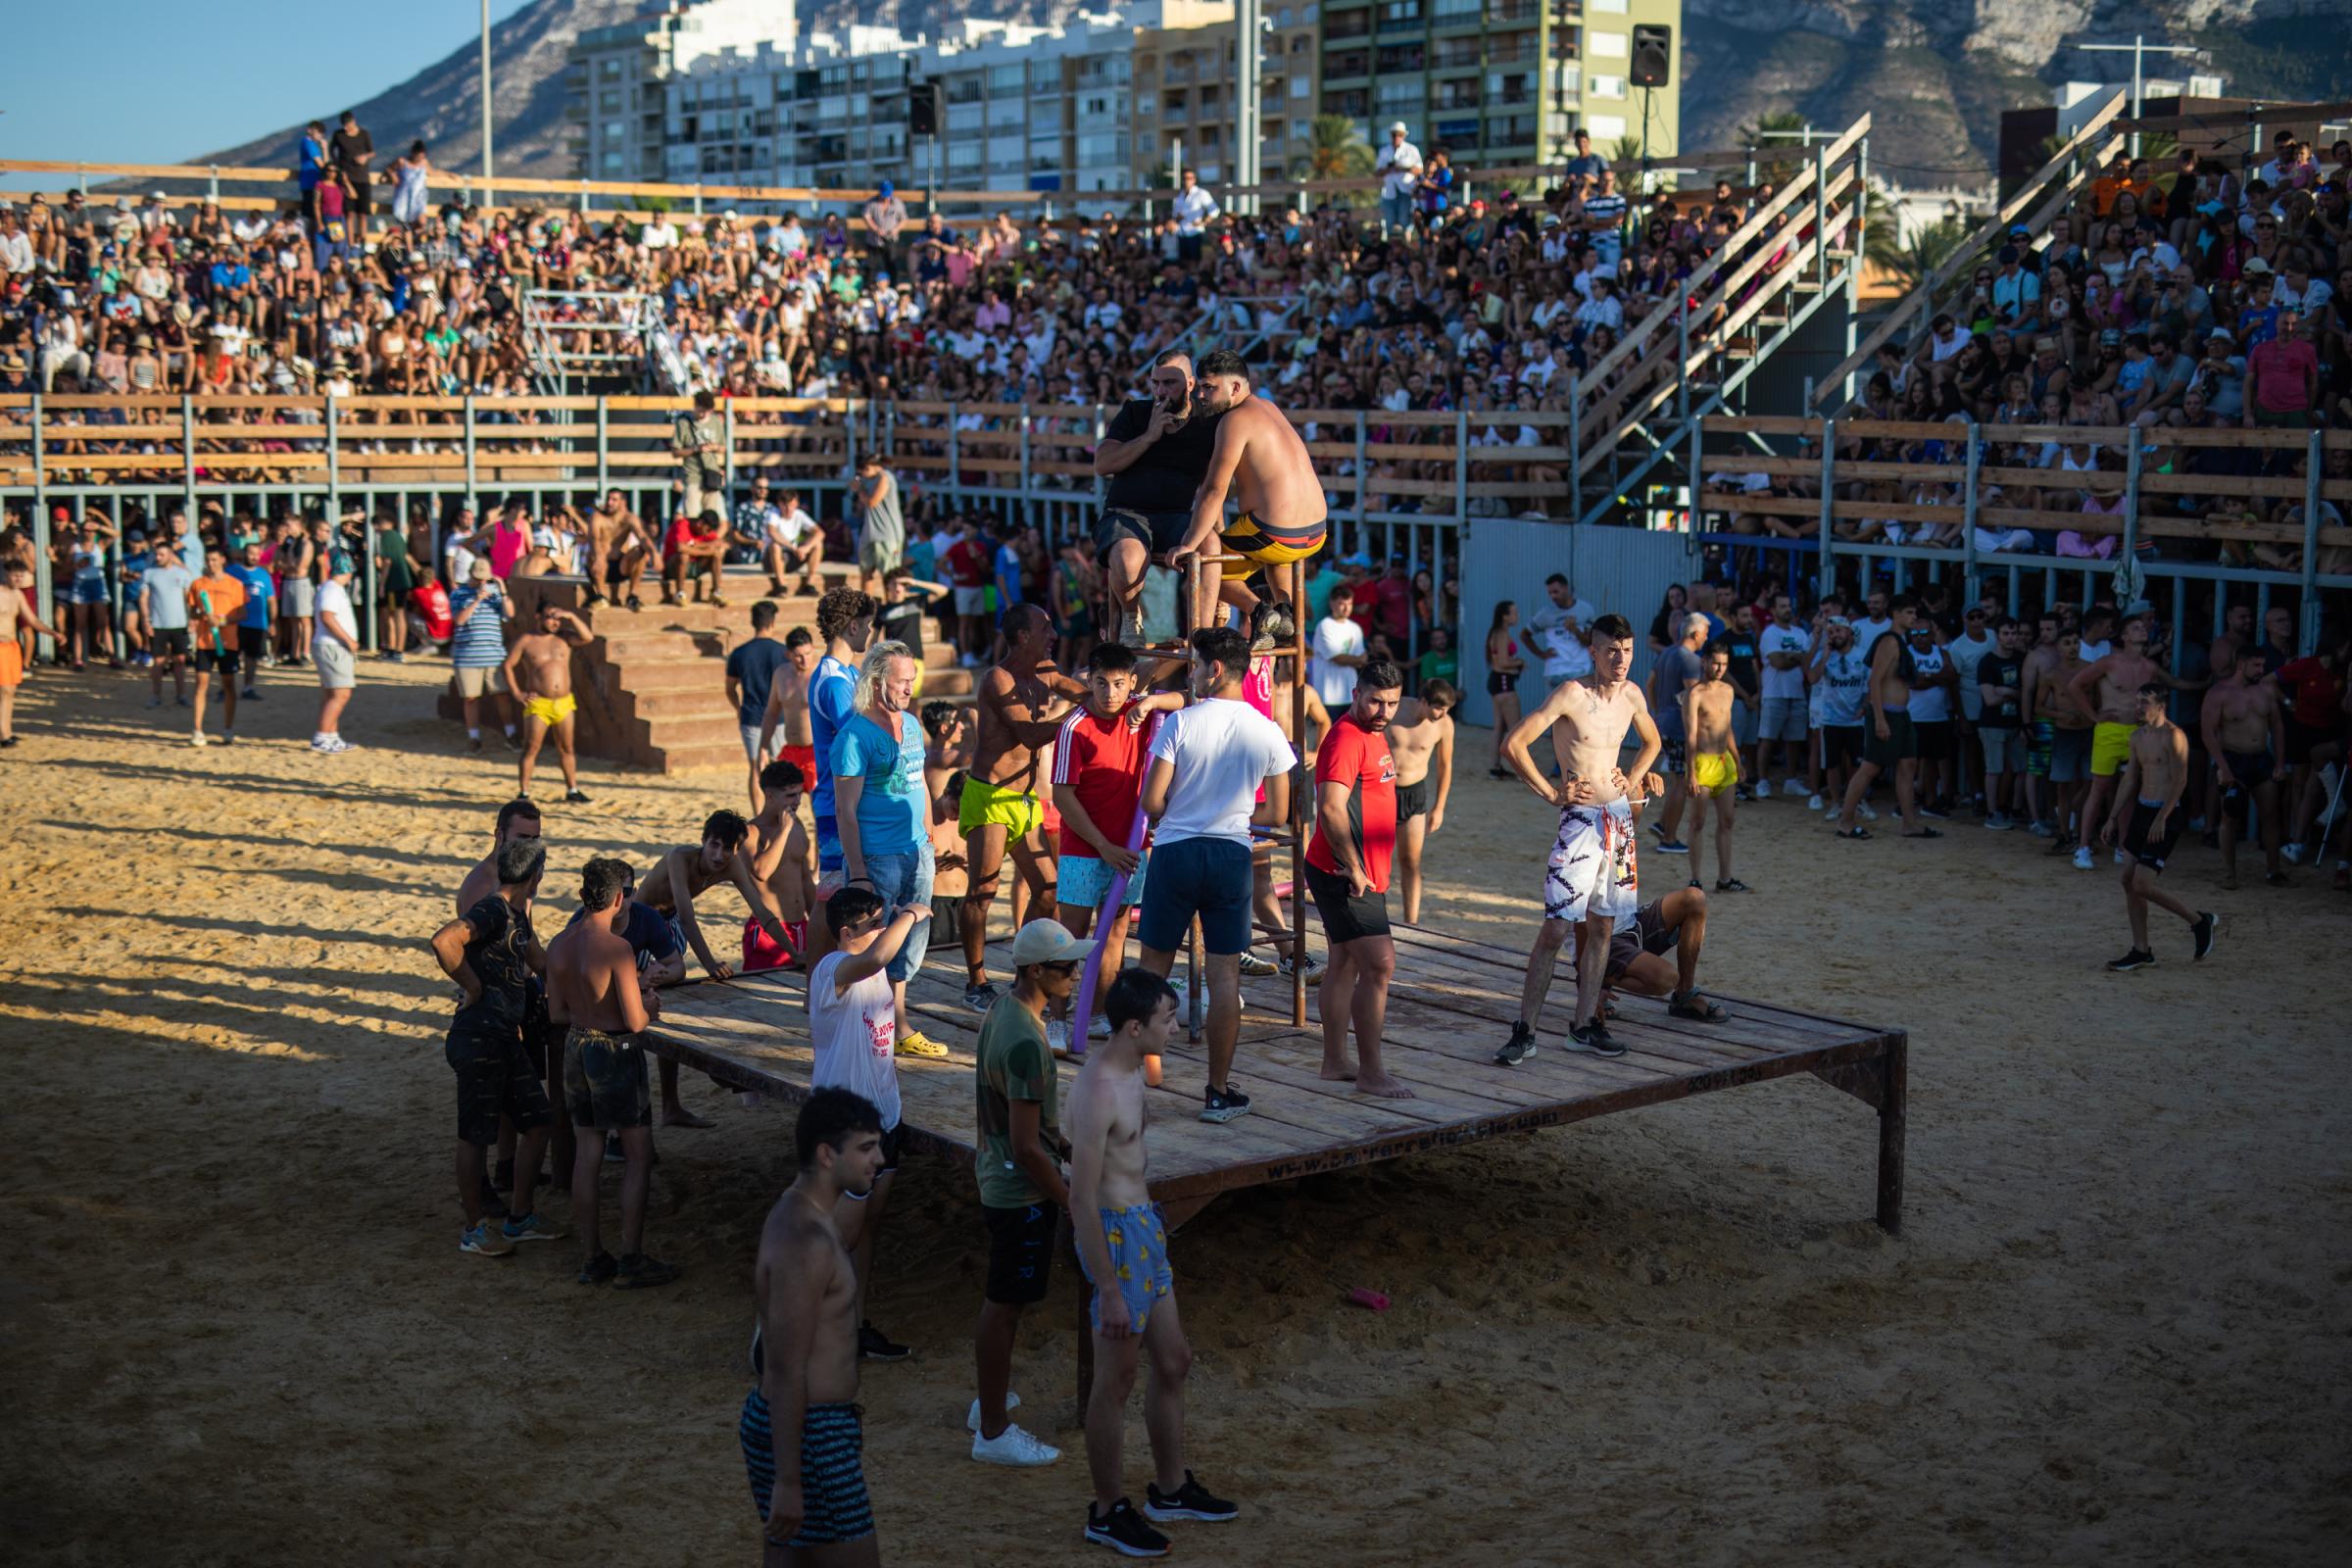 At 'Bous A La Mar', Revelers Take Plunge To Dodge Bulls And Beat The Heat - DENIA, SPAIN - JULY 17: Participants waiting for a bull...